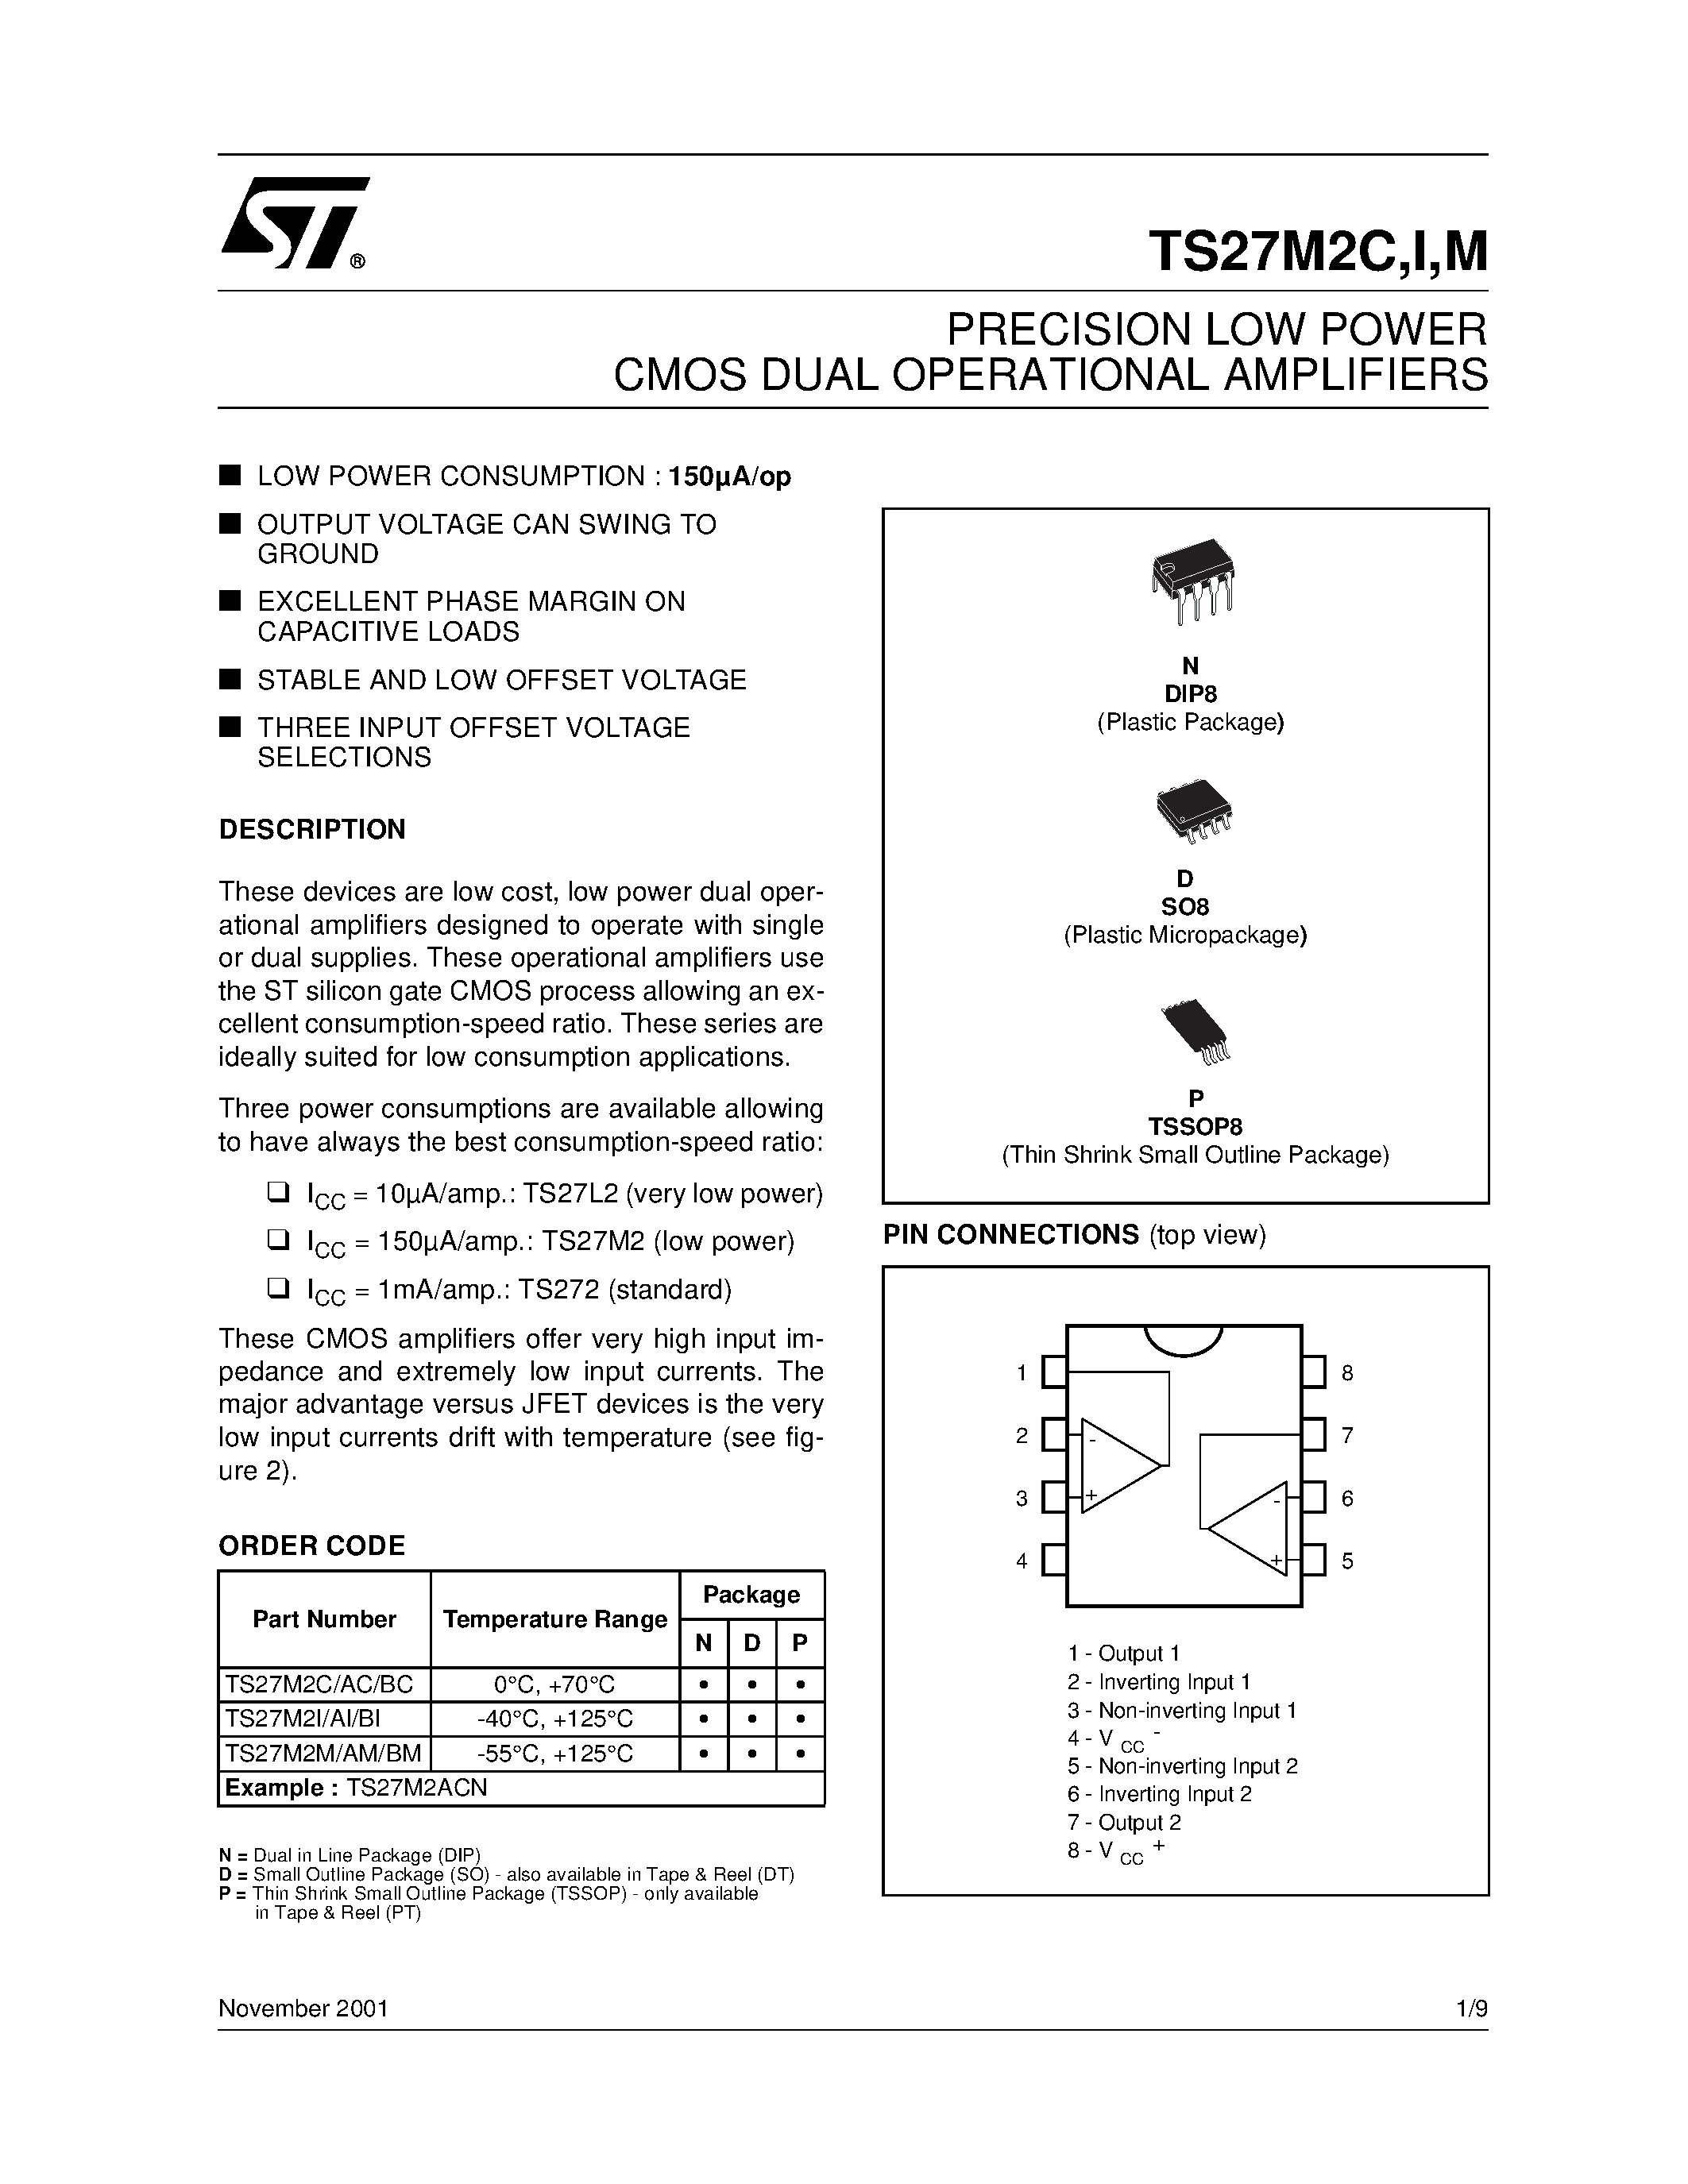 Datasheet TS27M2AM - PRECISION LOW POWER CMOS DUAL OPERATIONAL AMPLIFIERS page 1